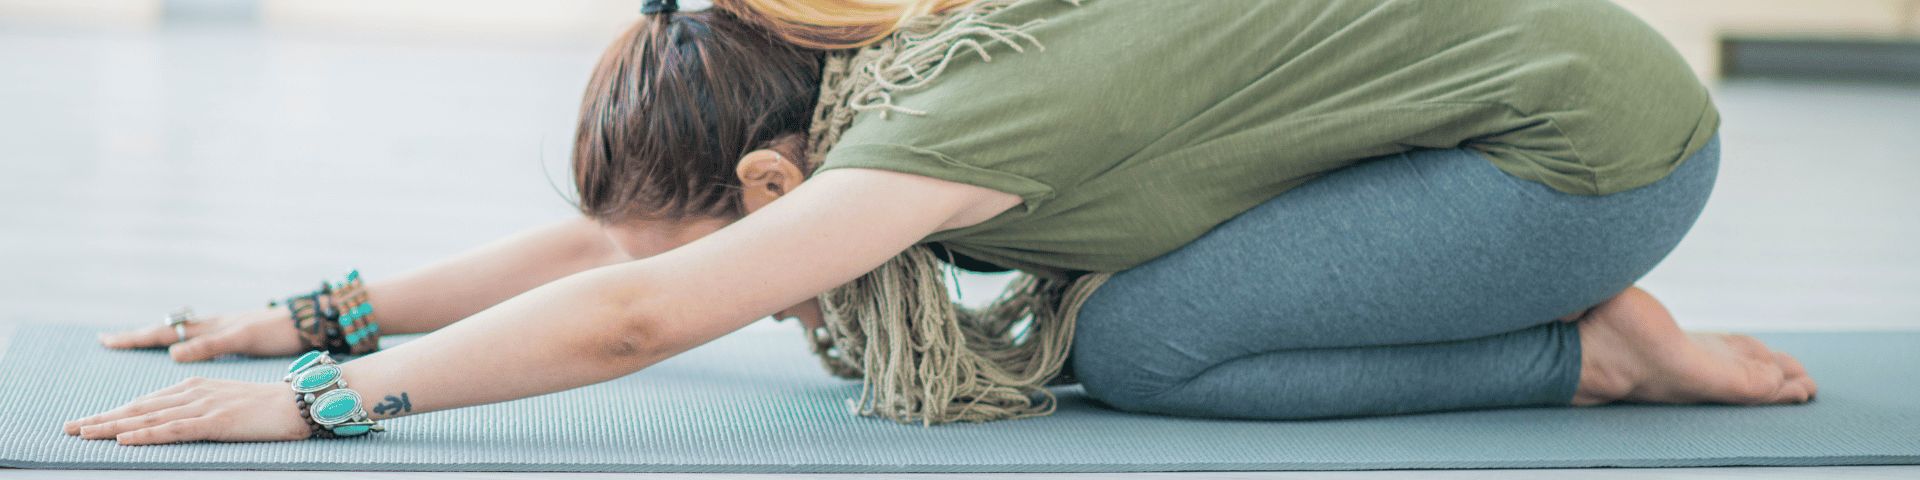 Wellness@Work: Best yoga stretches if you stand all day